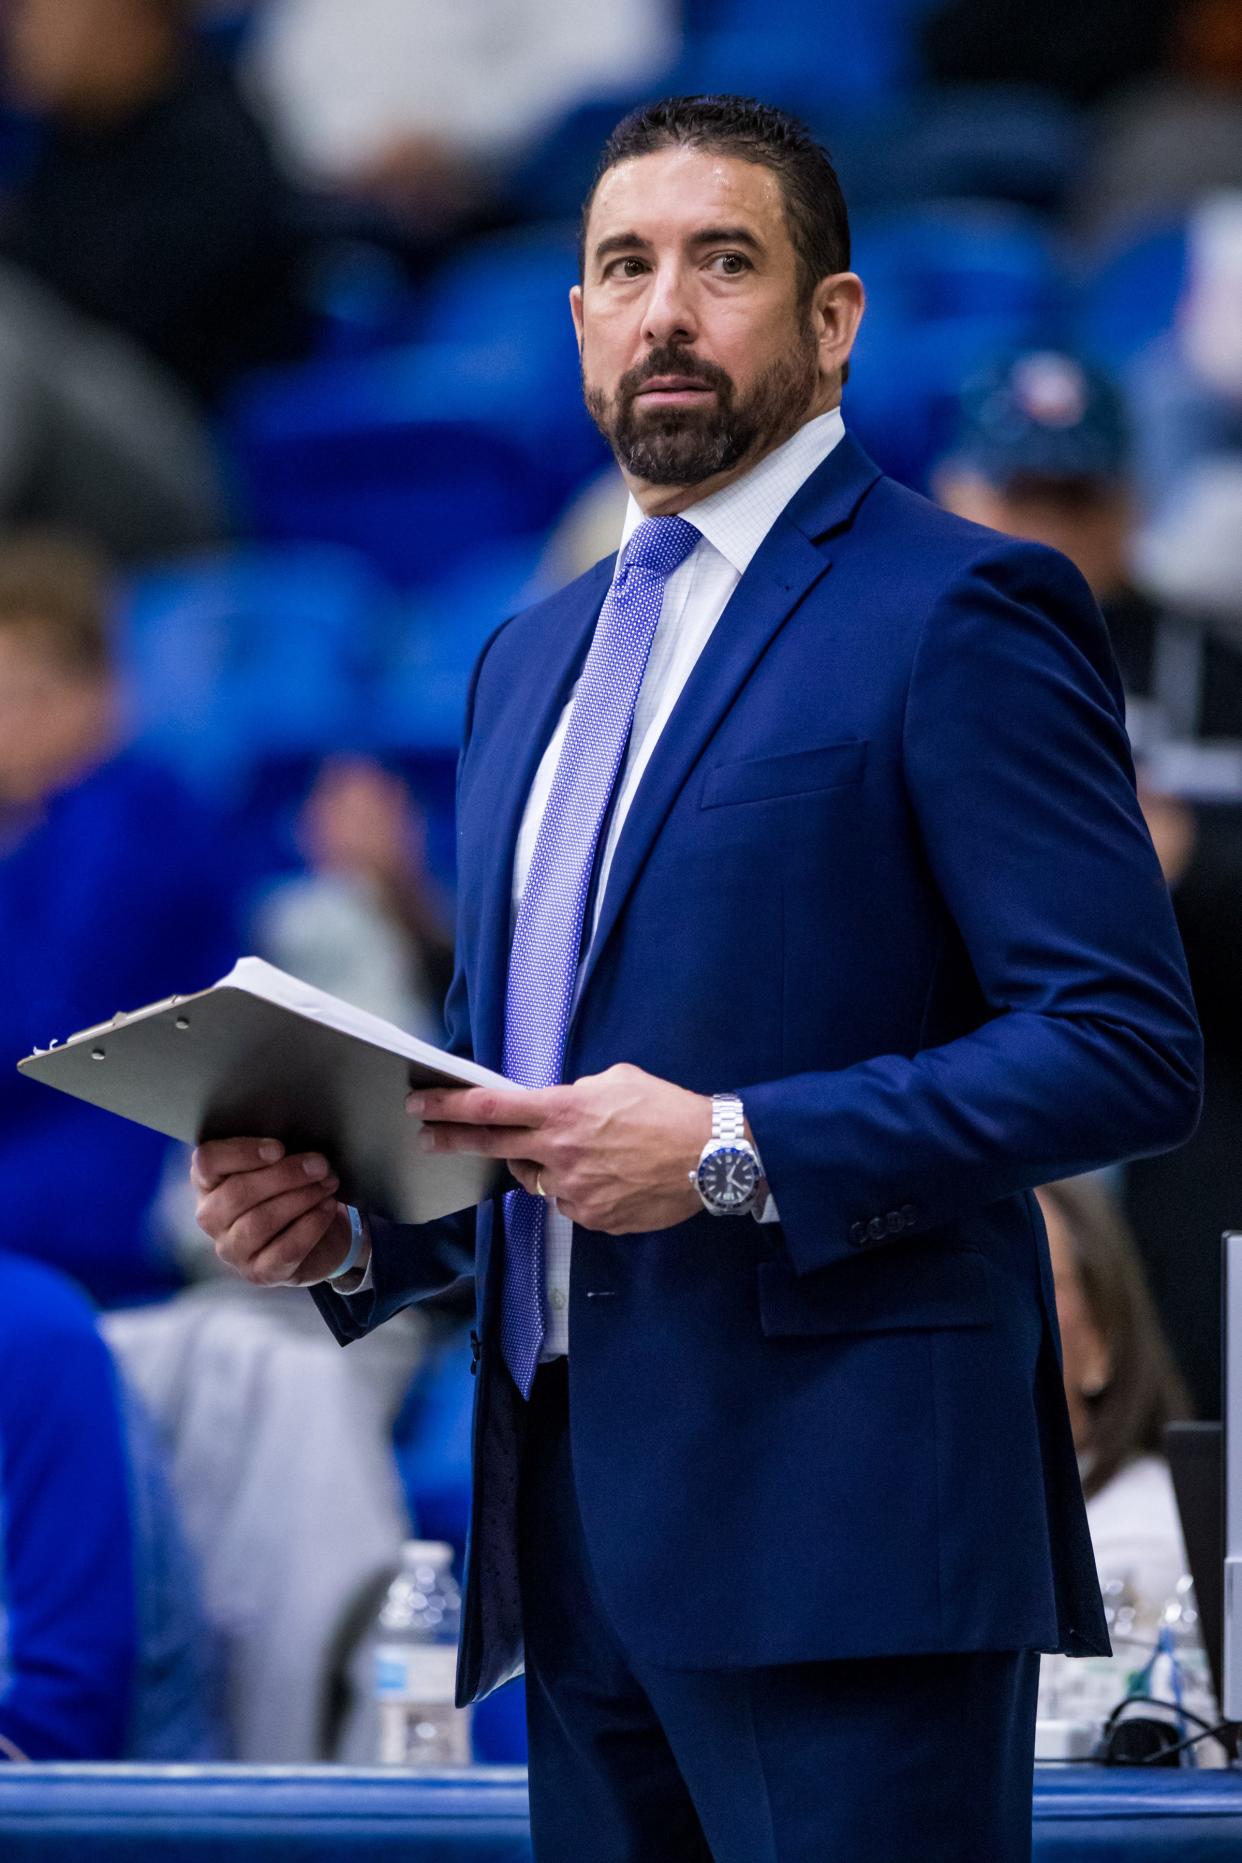 Lubbock Christian University coach Steve Gomez and the Lady Chaps will play Texas Woman's in the first round of the Division II NCAA Tournament this week. The game is a rematch of Saturday's Lone Star Conference tournament semifinal that Texas Woman's won 84-49.